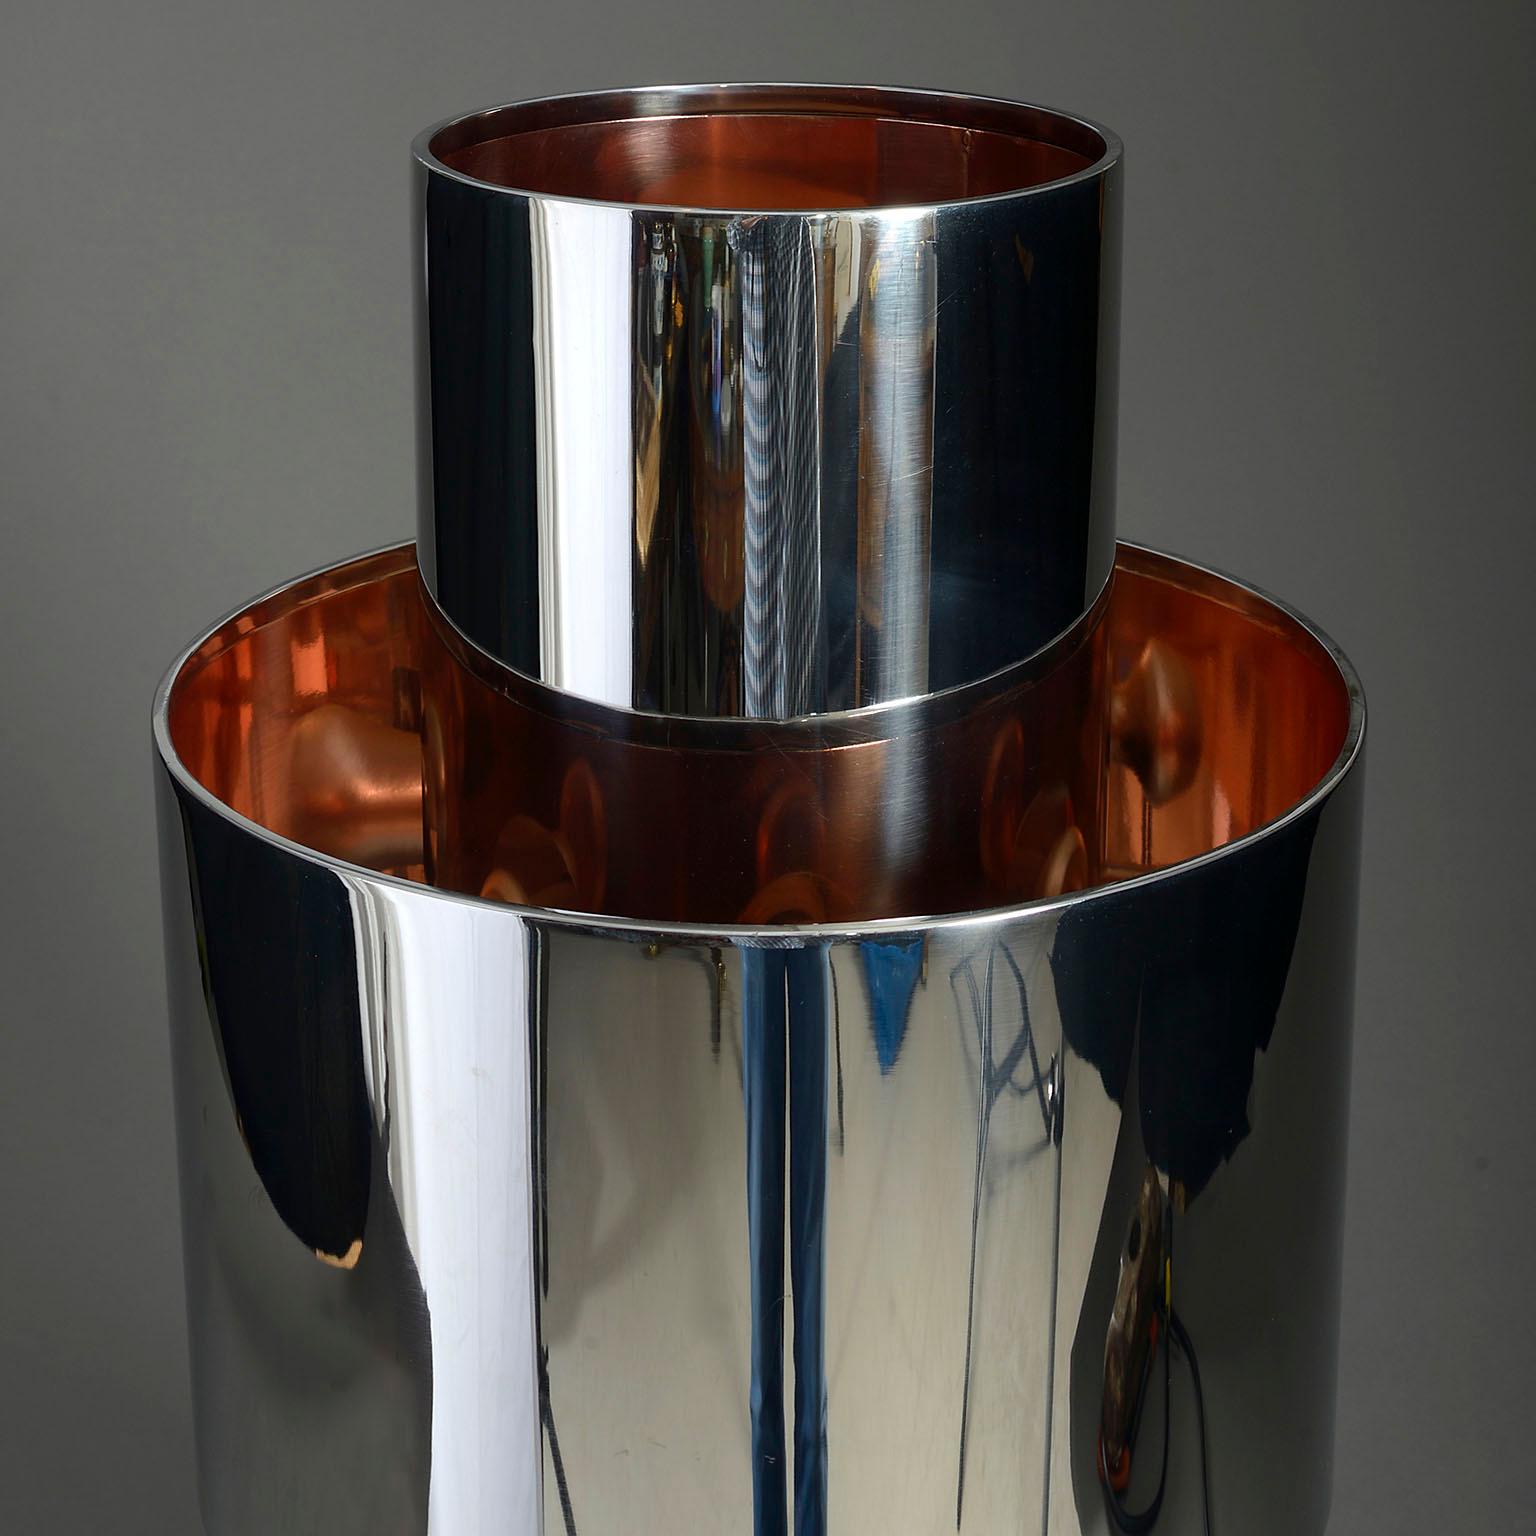 A mid-century polished chrome tubular table lamp. With dimmer switch and signed, Willy Rizzo.

Born in Naples, Willy Rizzo (1928-2013) began his career as a photographer in Paris in the 1940s. A great photographer of personalities, fashion and